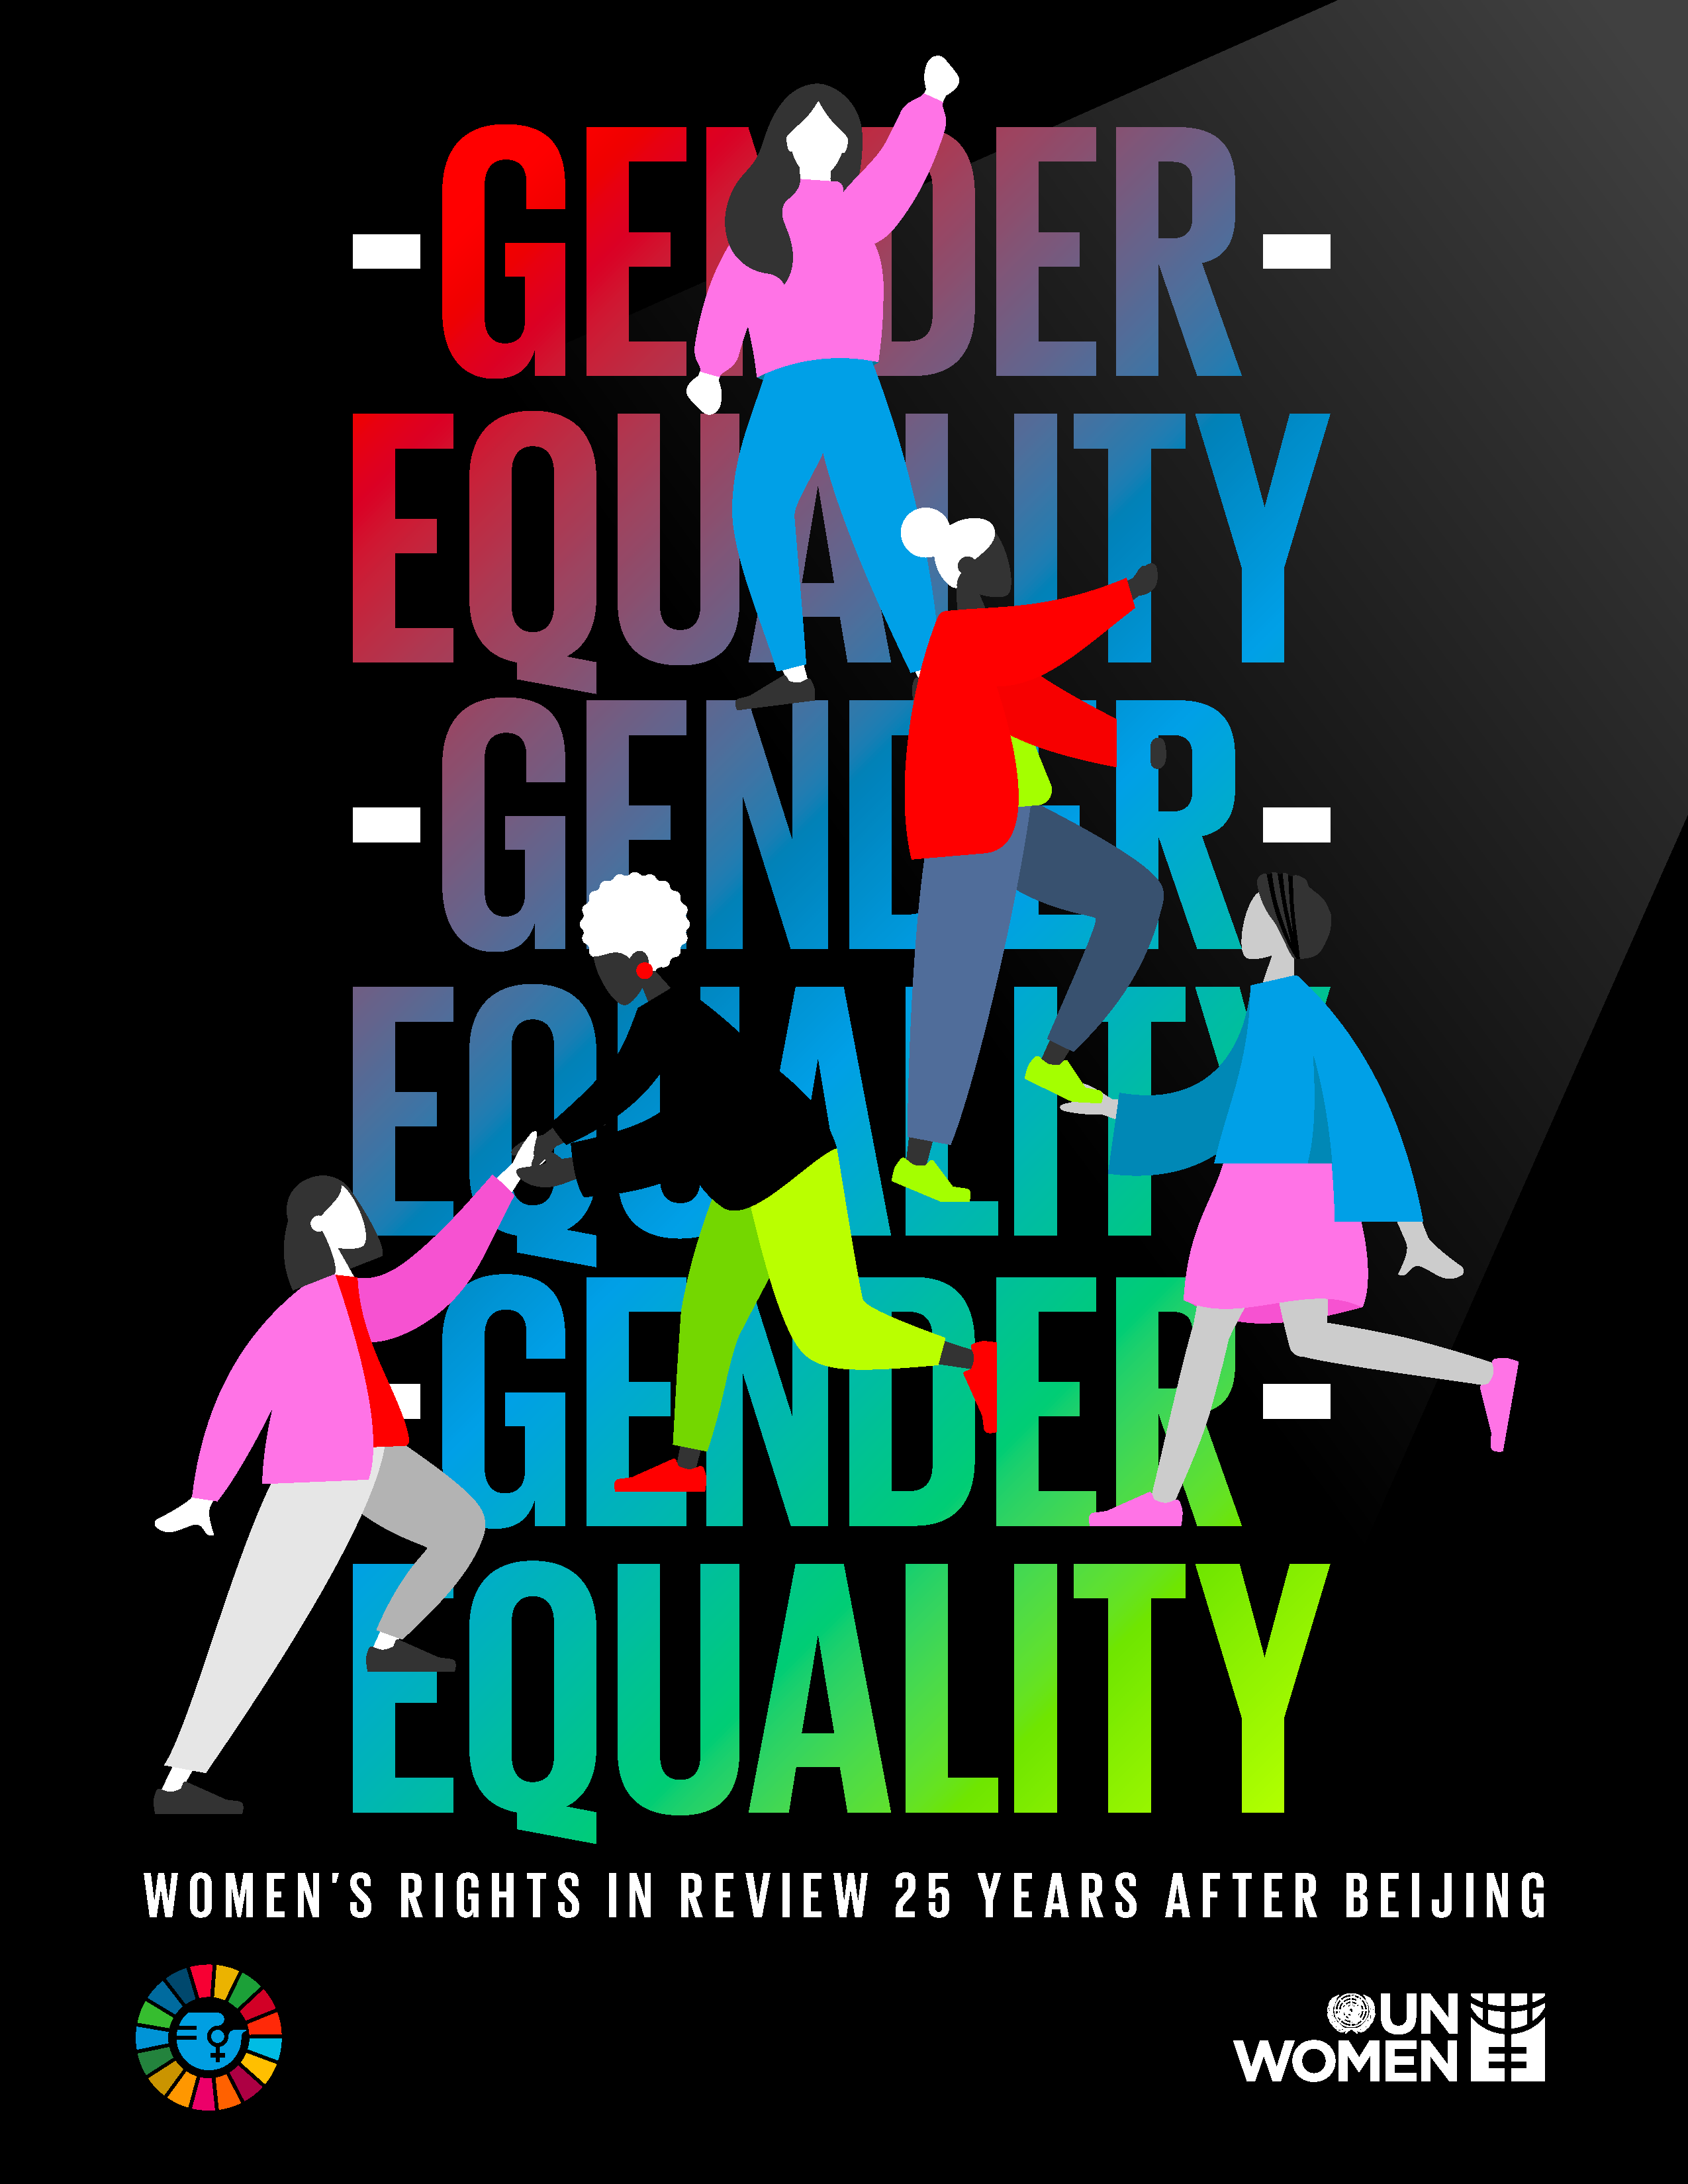 Generation Equality Women's Rights in Review 25 years after Beijing